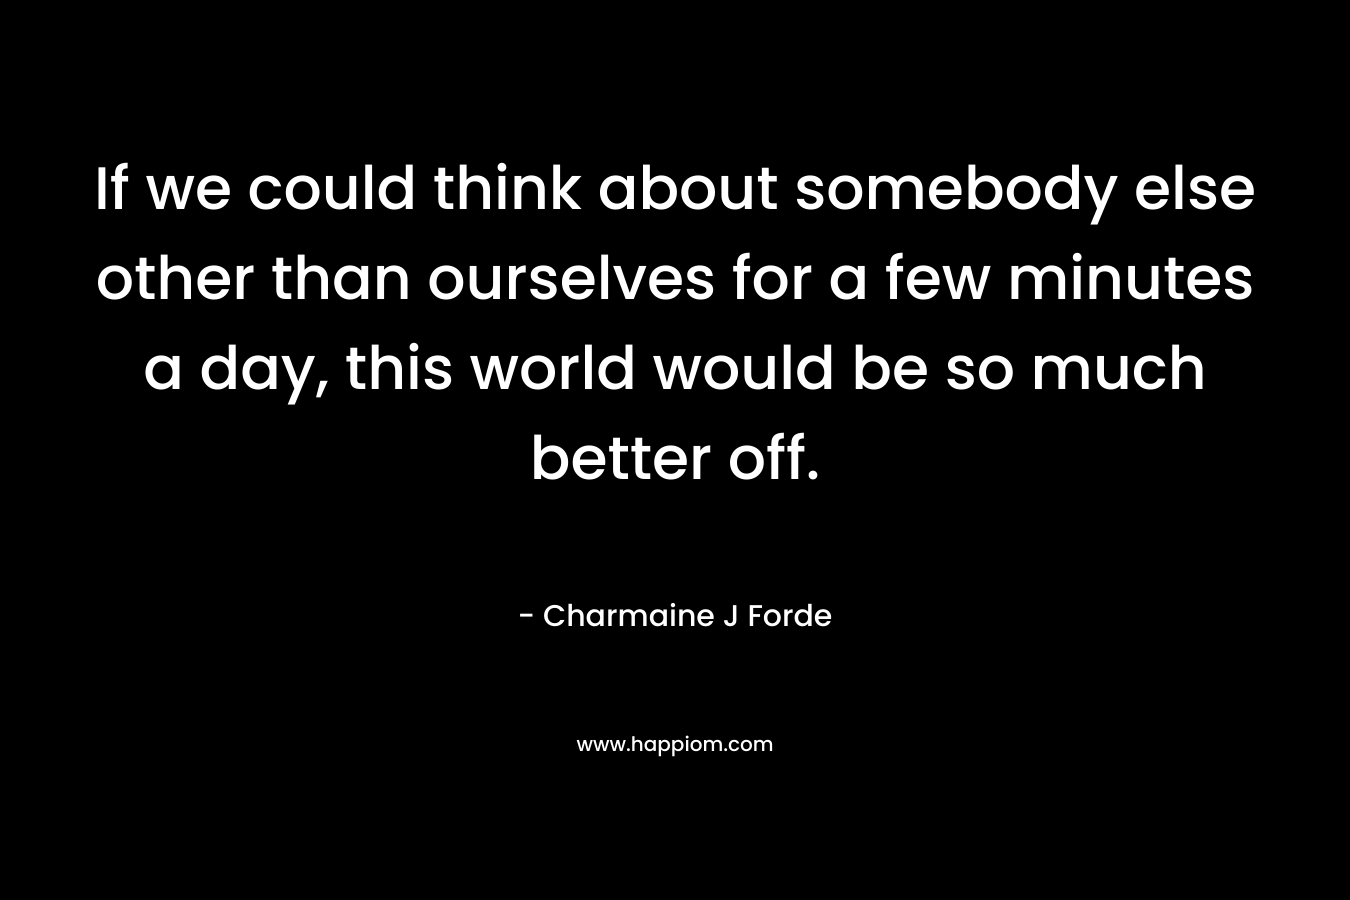 If we could think about somebody else other than ourselves for a few minutes a day, this world would be so much better off.